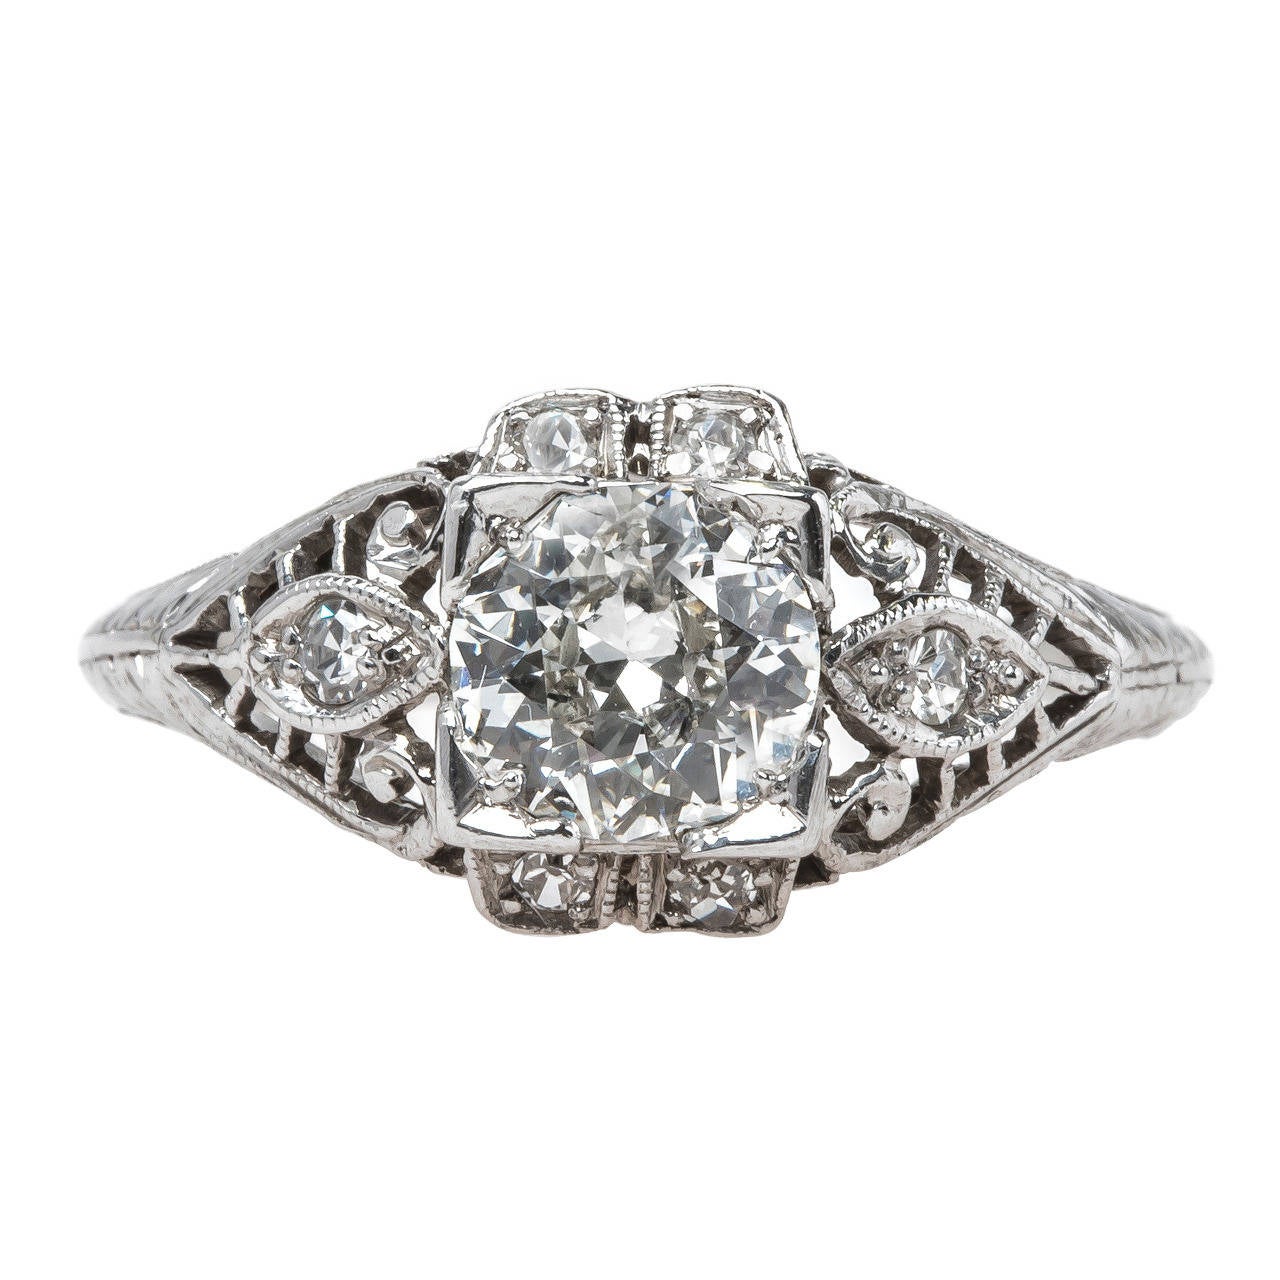 One-of-a-Kind Handcrafted Edwardian Ring with Old Mine Brilliant Cut Diamond